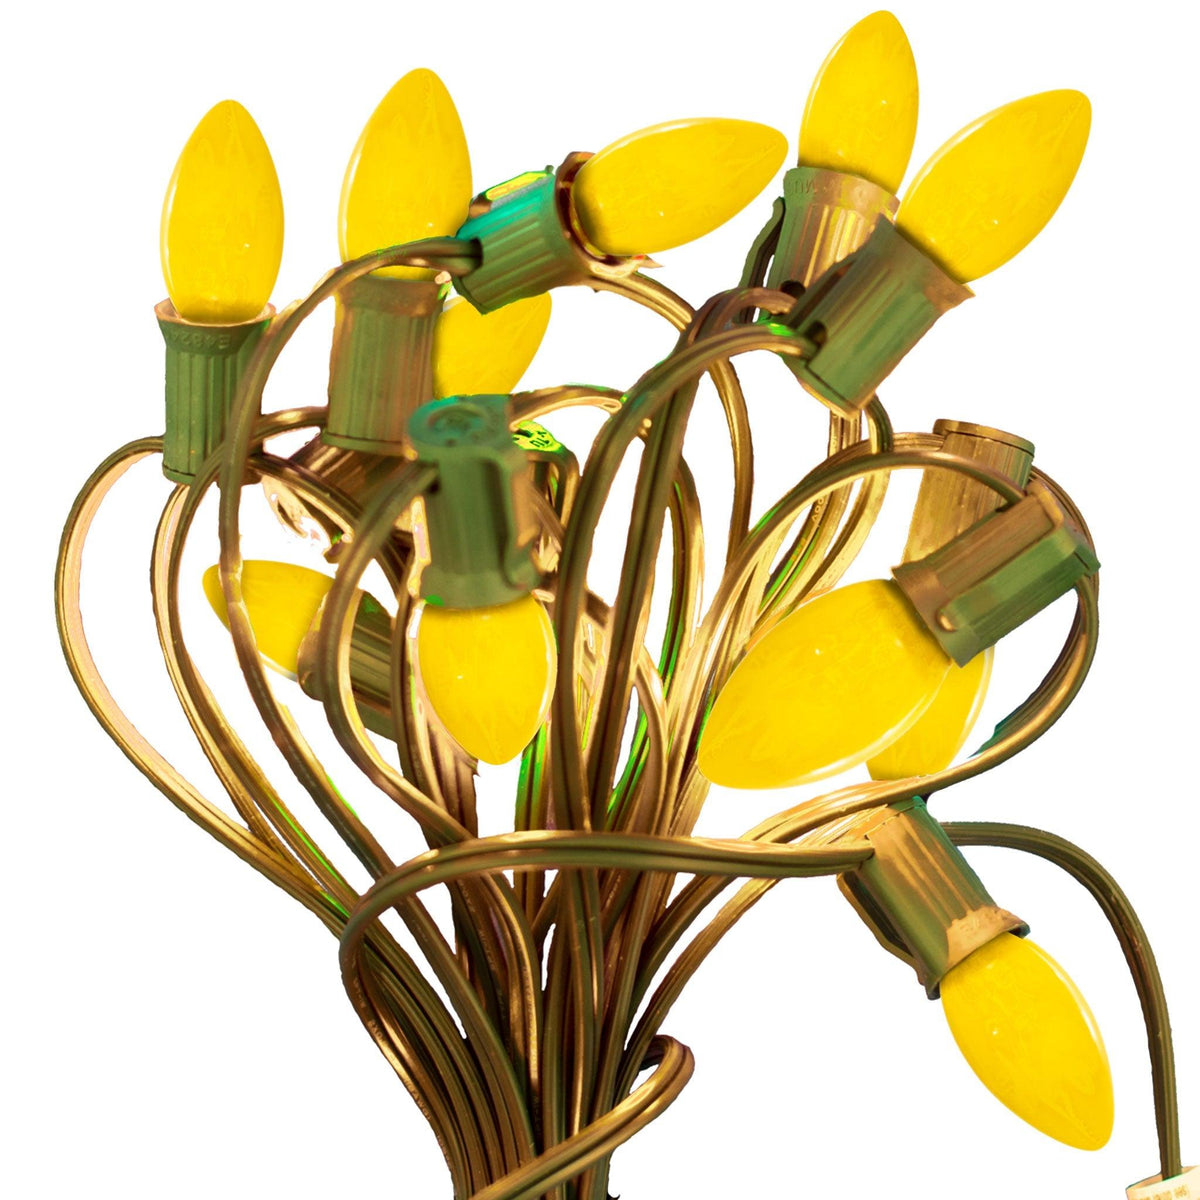 Solid Opaque Yellow Bulbs on a Green Patio String Cord.  On sale by Lee Display in C7 and C9 bulb sizes with a 25ft cord.